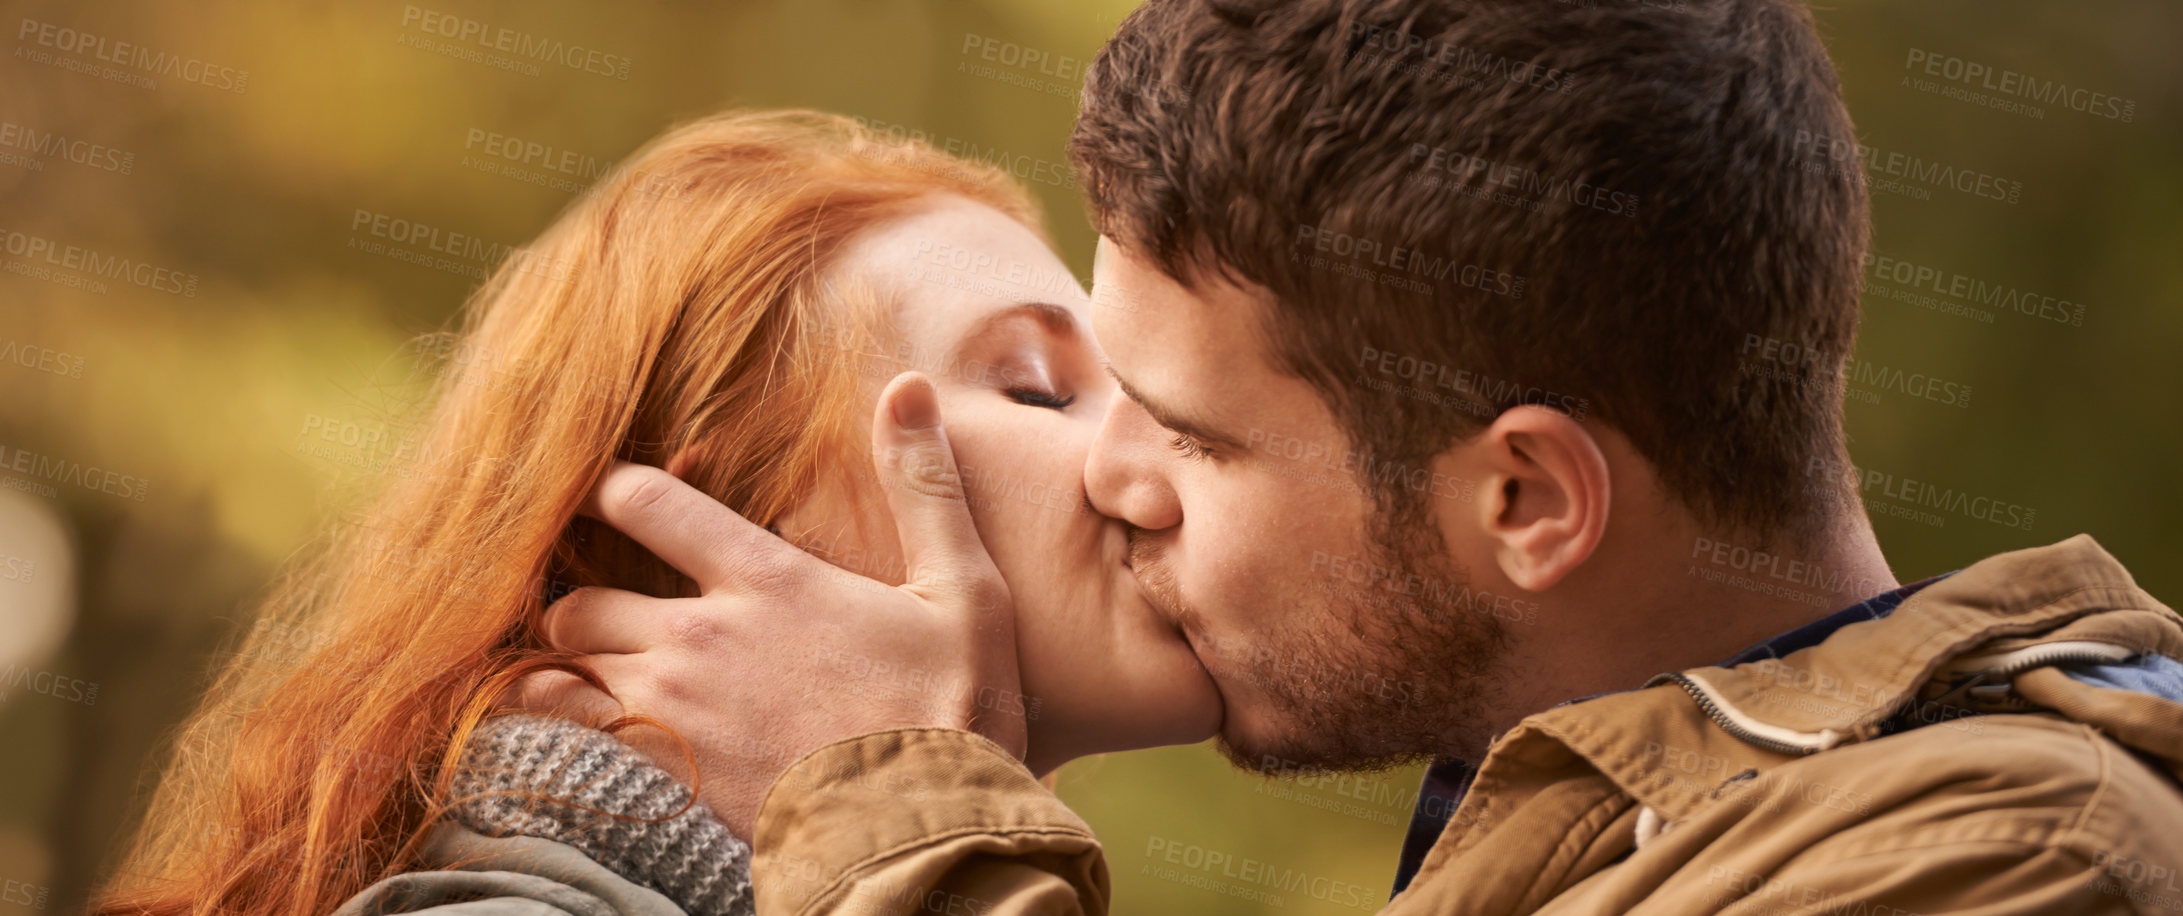 Buy stock photo Shot of a happy young couple sharing a kiss outdoors